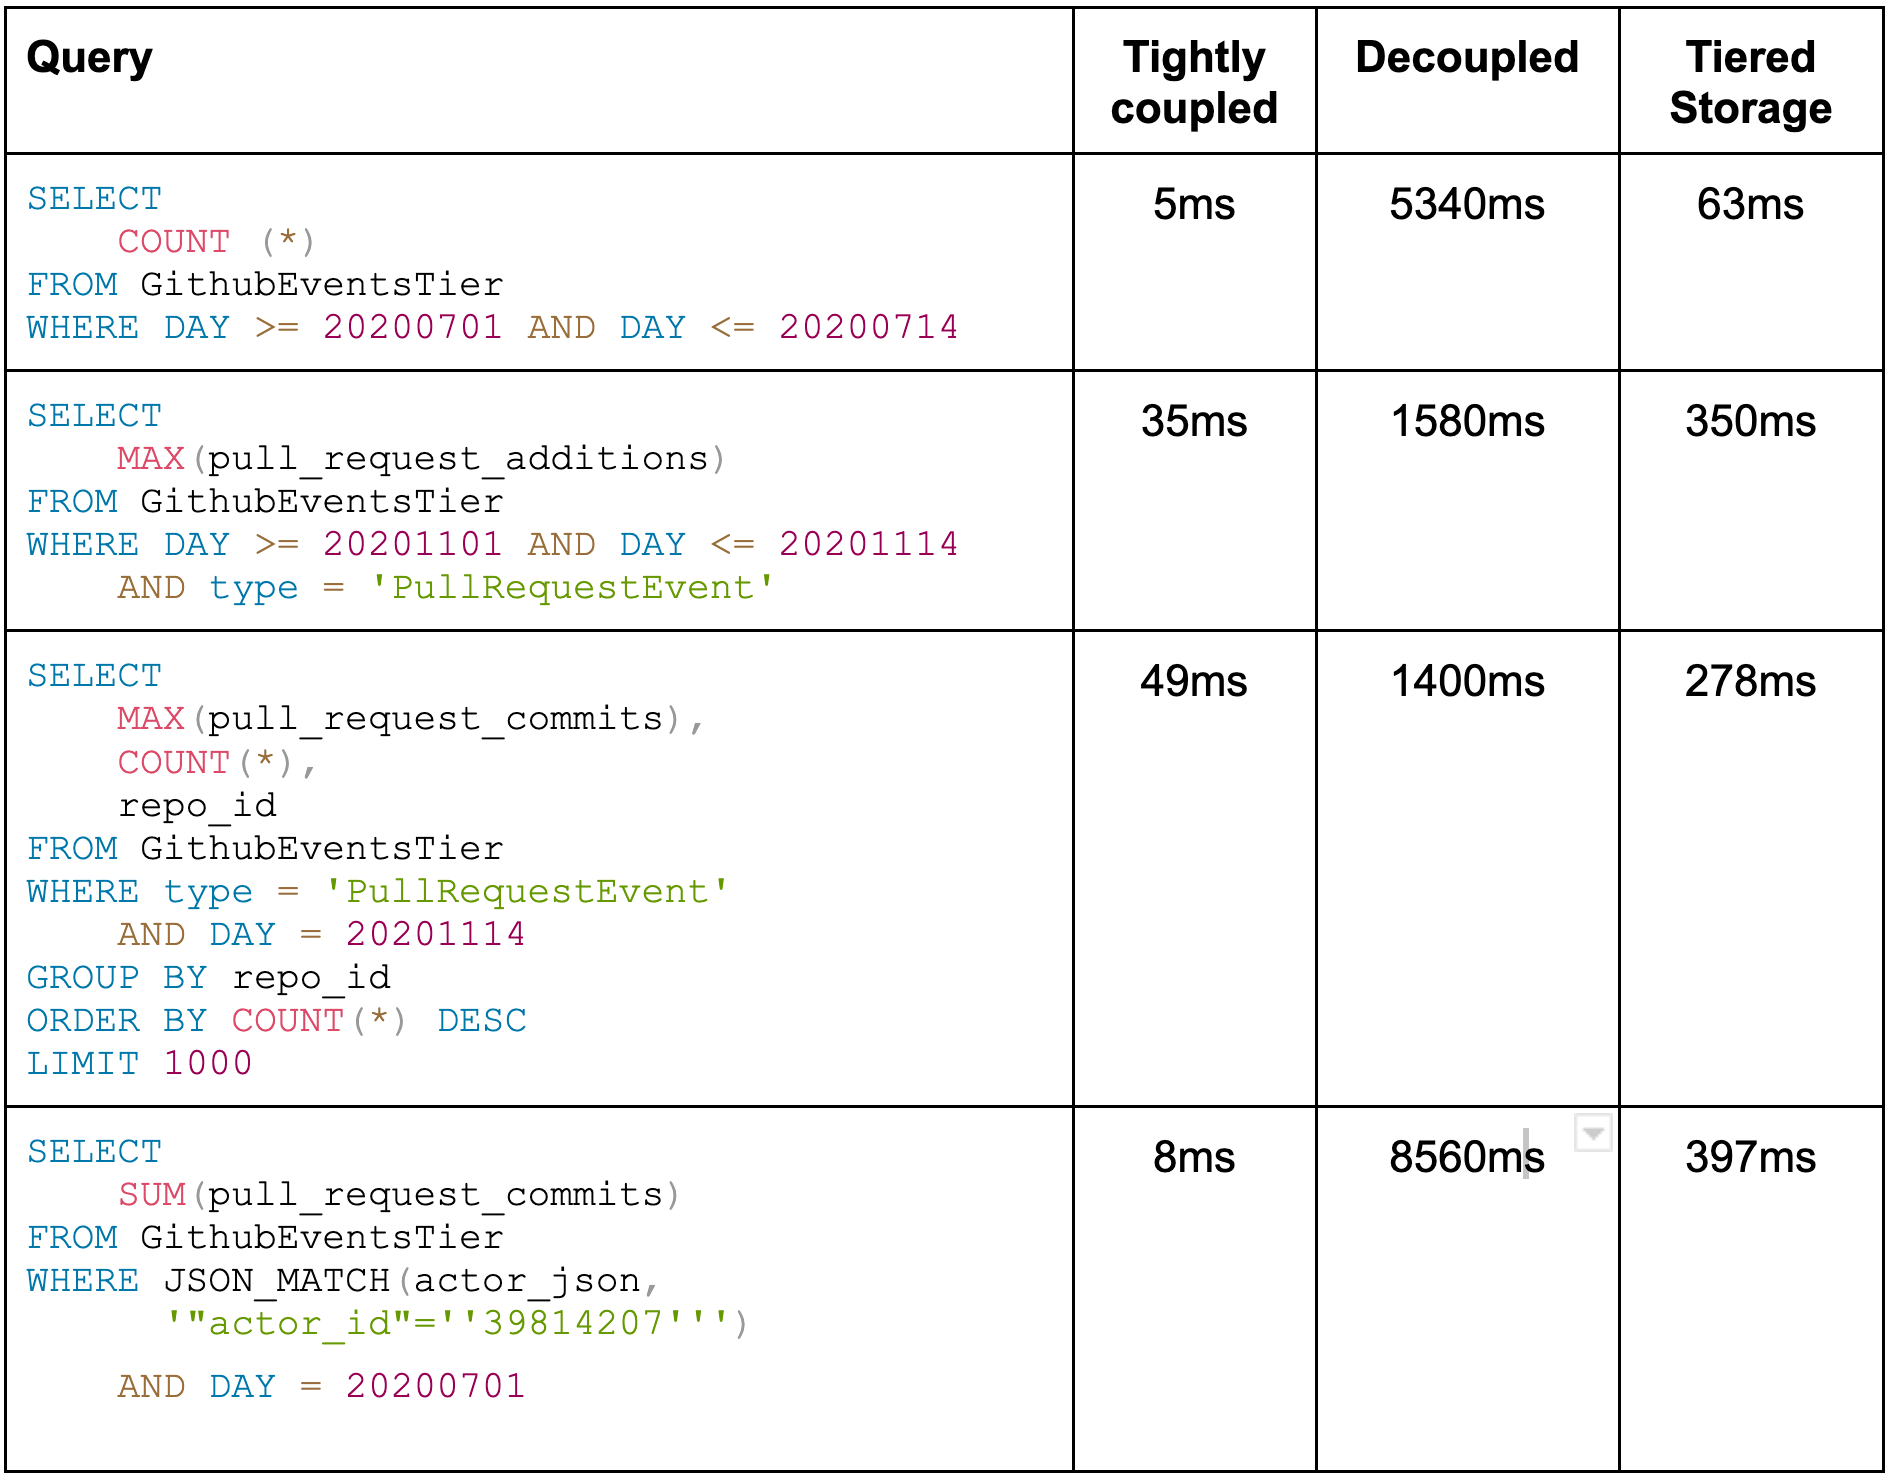 Tightly coupled, decoupled, and tiered storage query comparison